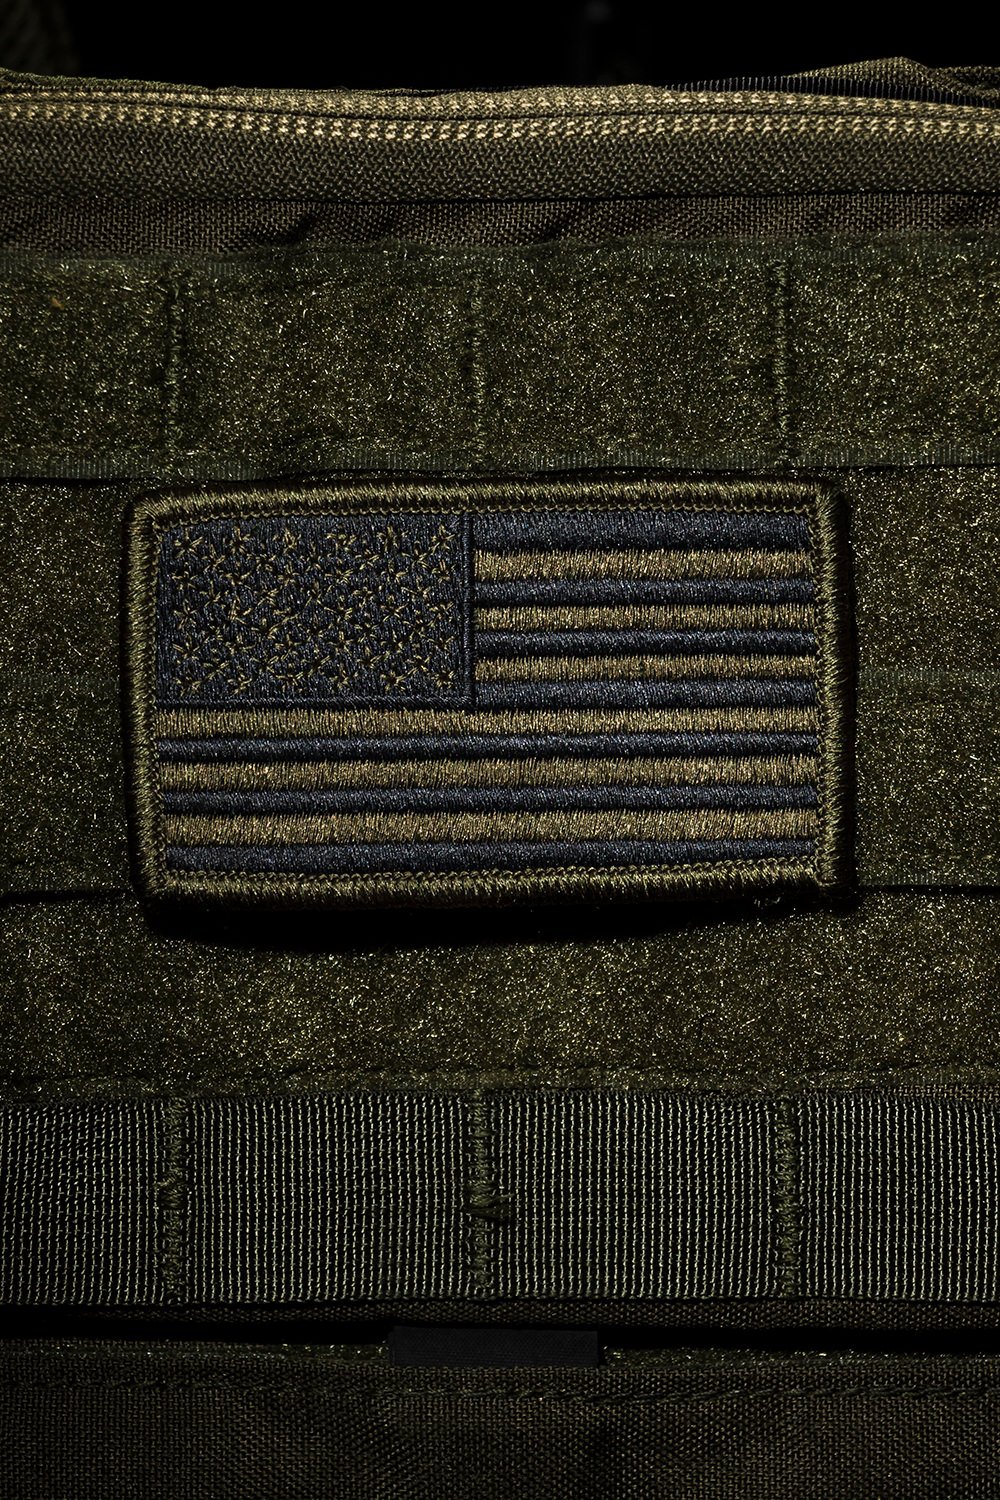 all black american flag patch